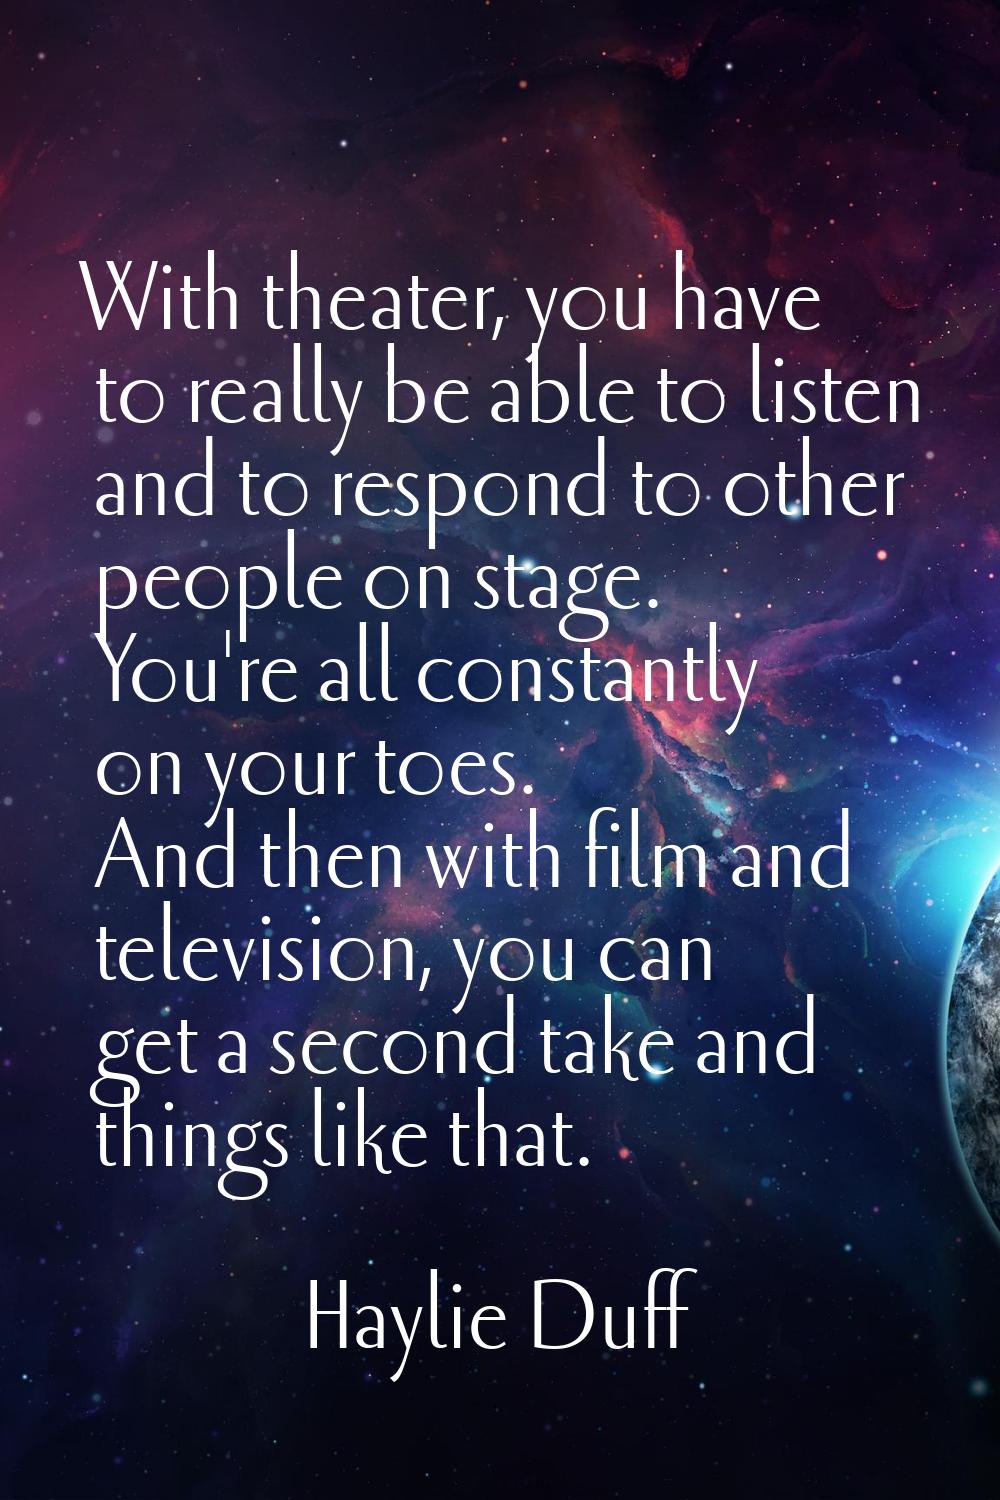 With theater, you have to really be able to listen and to respond to other people on stage. You're 